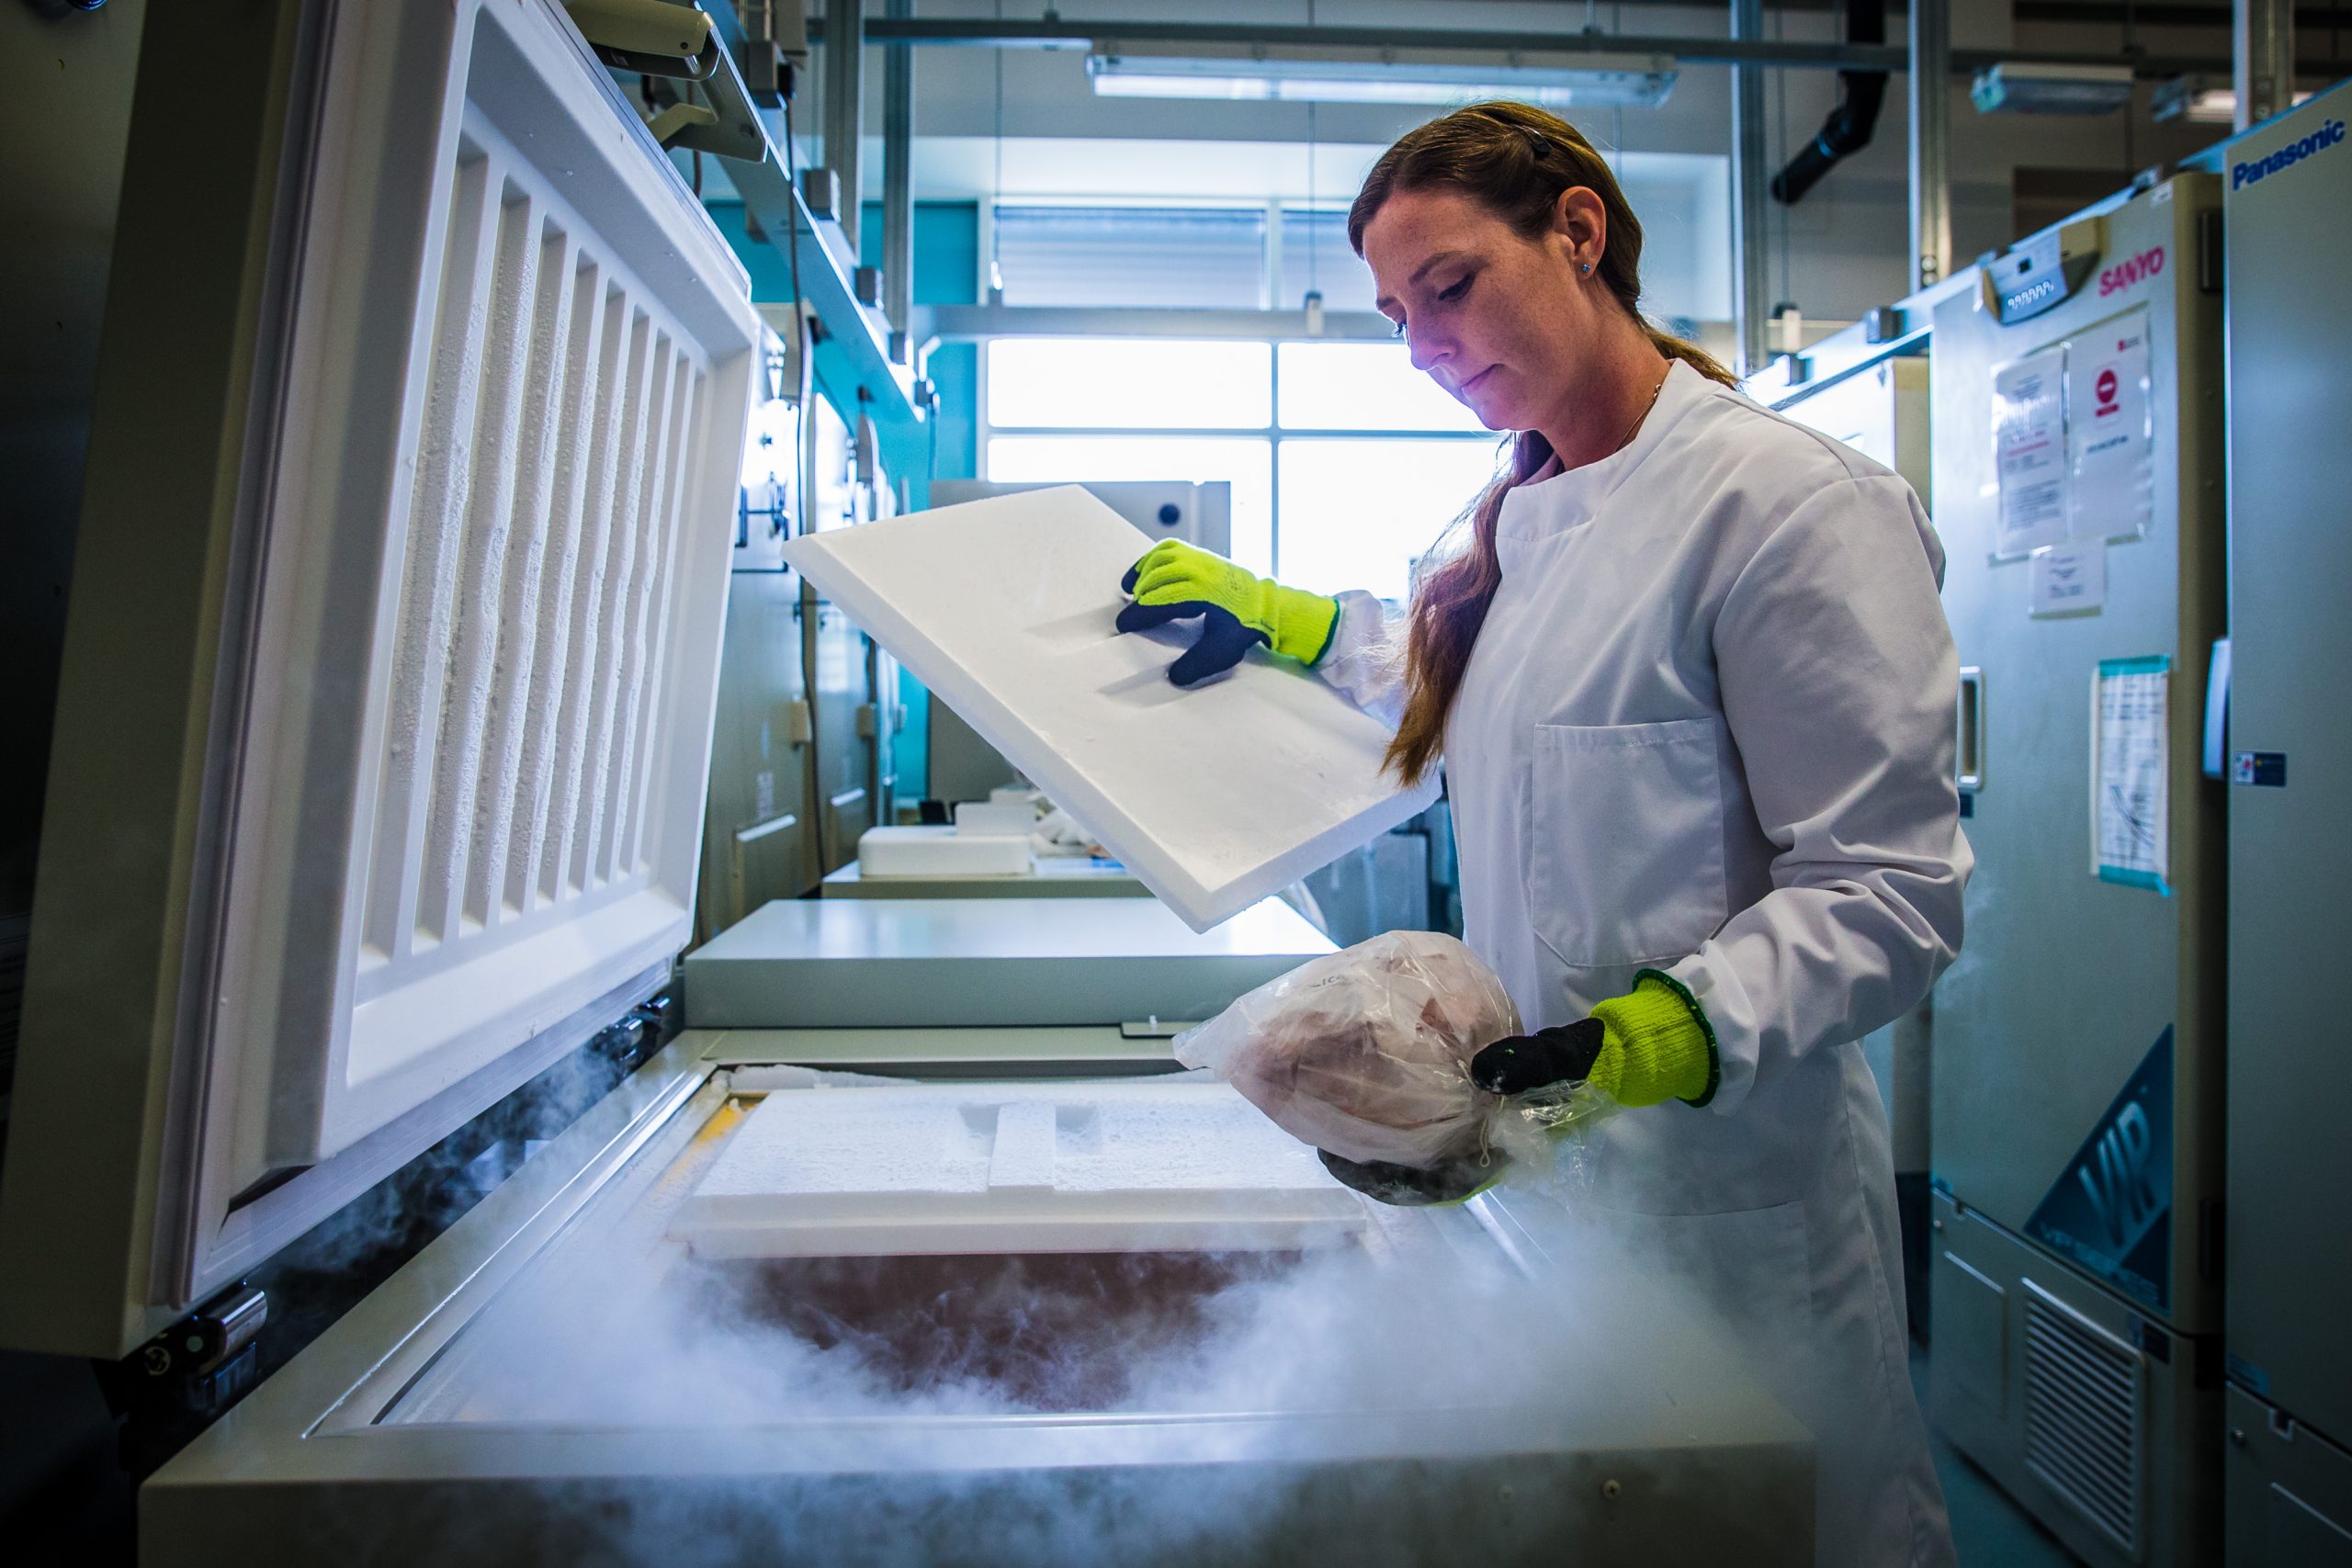 Dr Laura Palmer, 36, examines brain samples stored in a freezer at -150 degrees centigrade at the Brain Bank at Southmead Hospital, Bristol. July 17 2017.